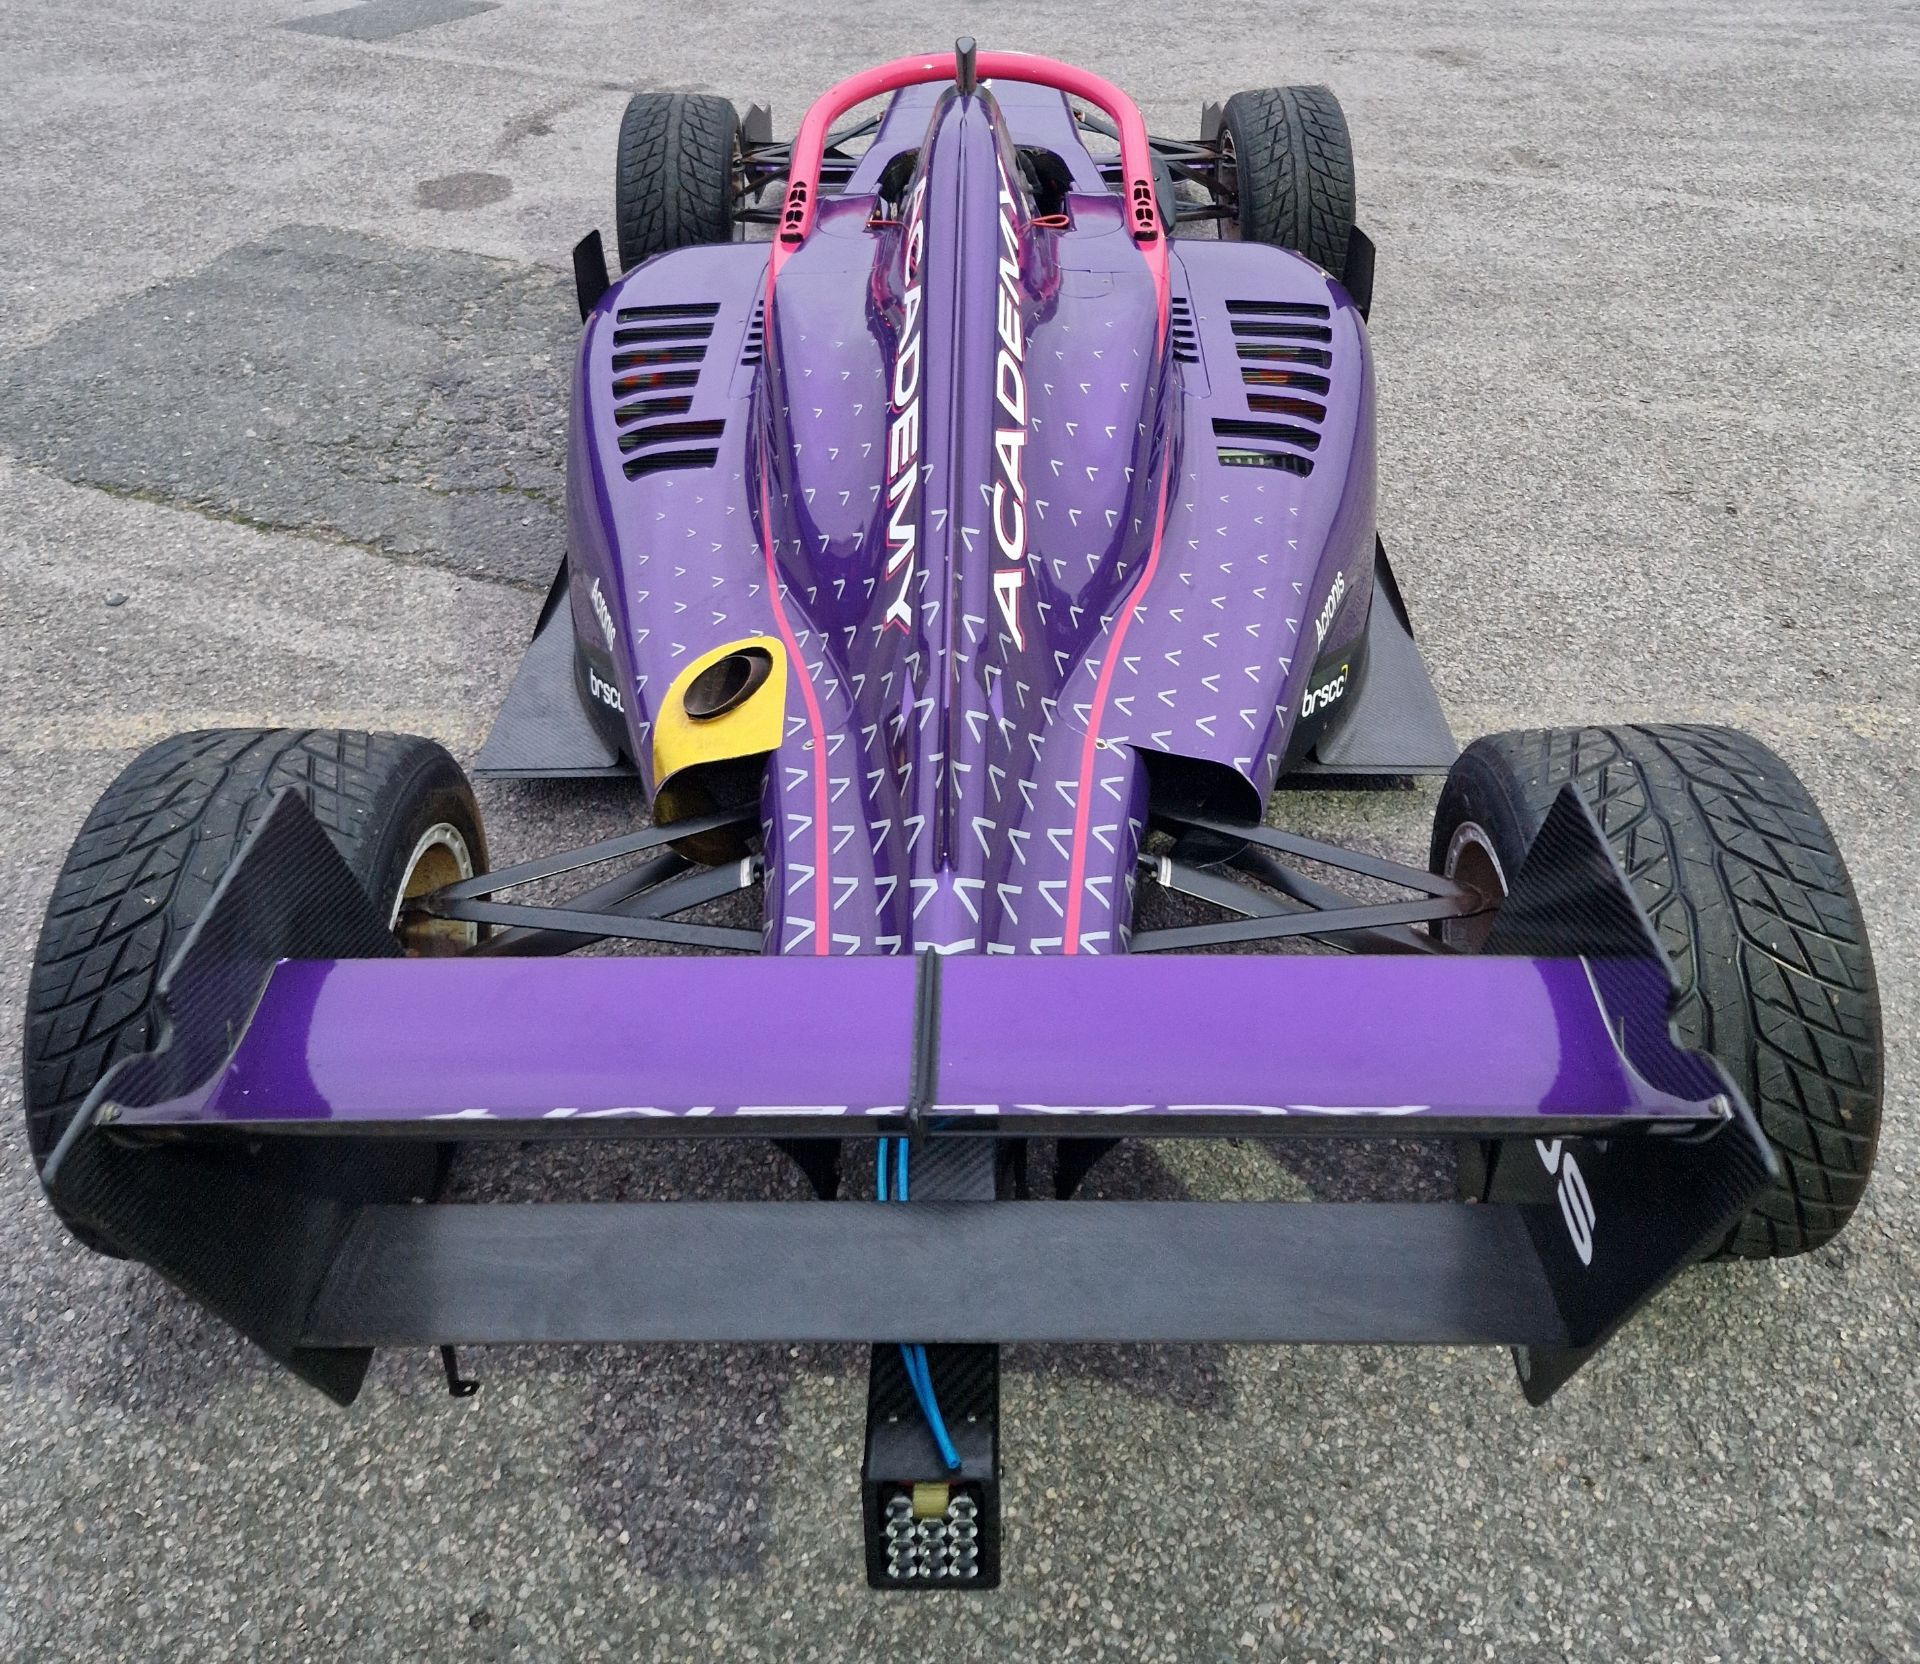 One TATUUS F3 T-318 Alfa Romeo Race Car Chassis No. 057 (2019) Finished in the W Series Academy - Image 4 of 10